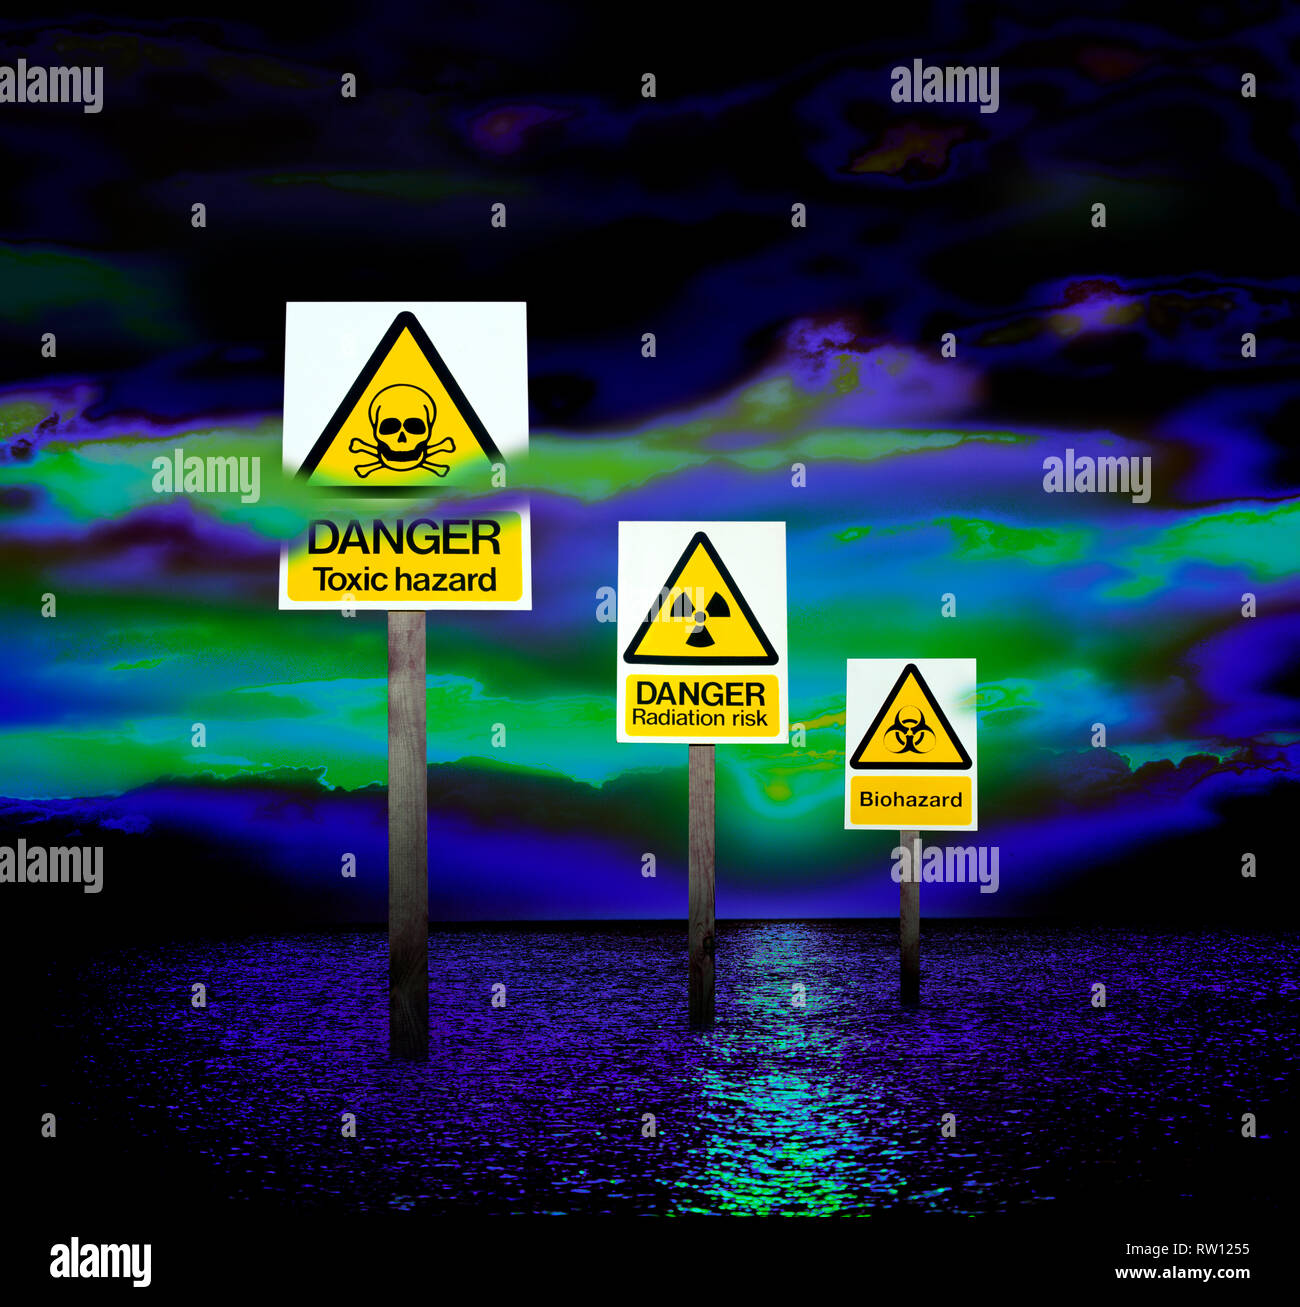 Hazard signs warn of danger in a digital dystopia of polluted air and water, of swirling oil slicks where once were clouds... Stock Photo